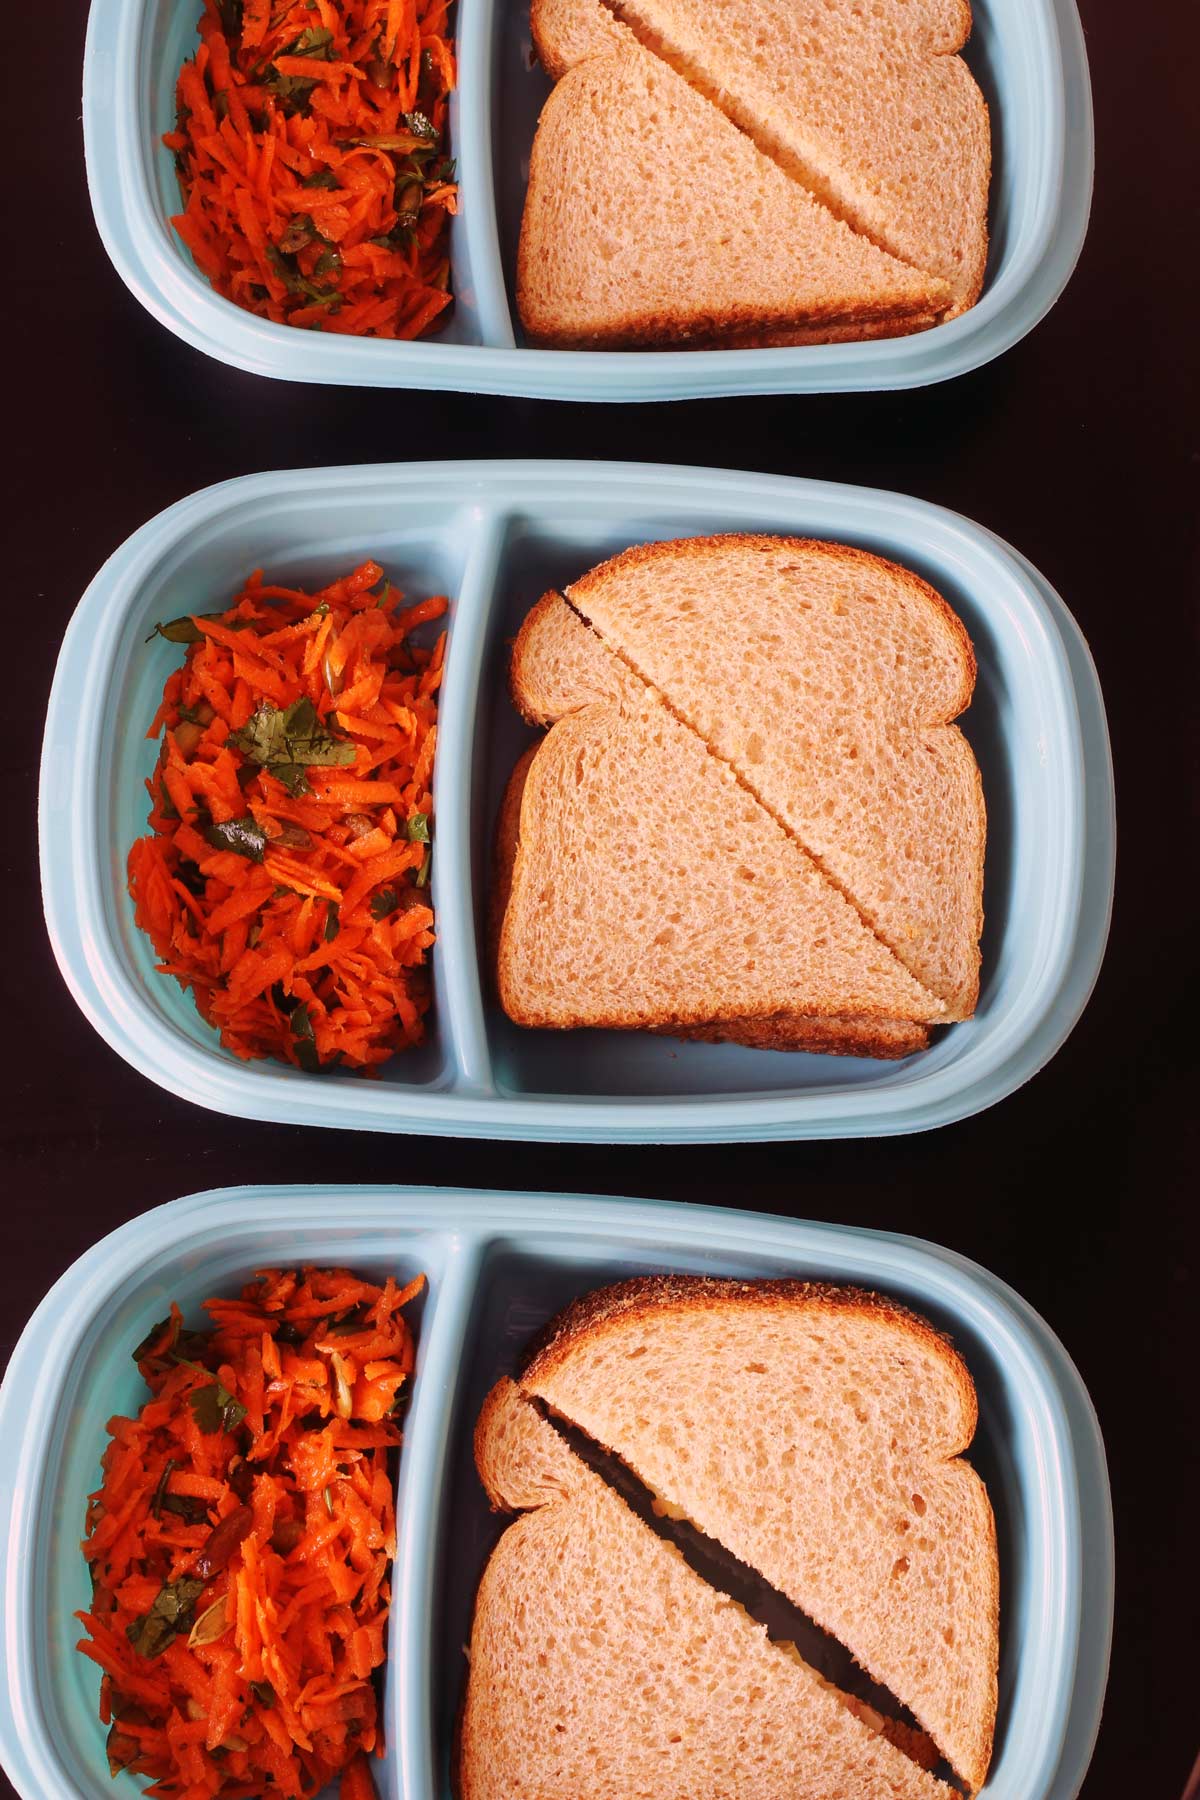 egg salad sandwiches packed in divided dishes with carrot salad in the side compartment.